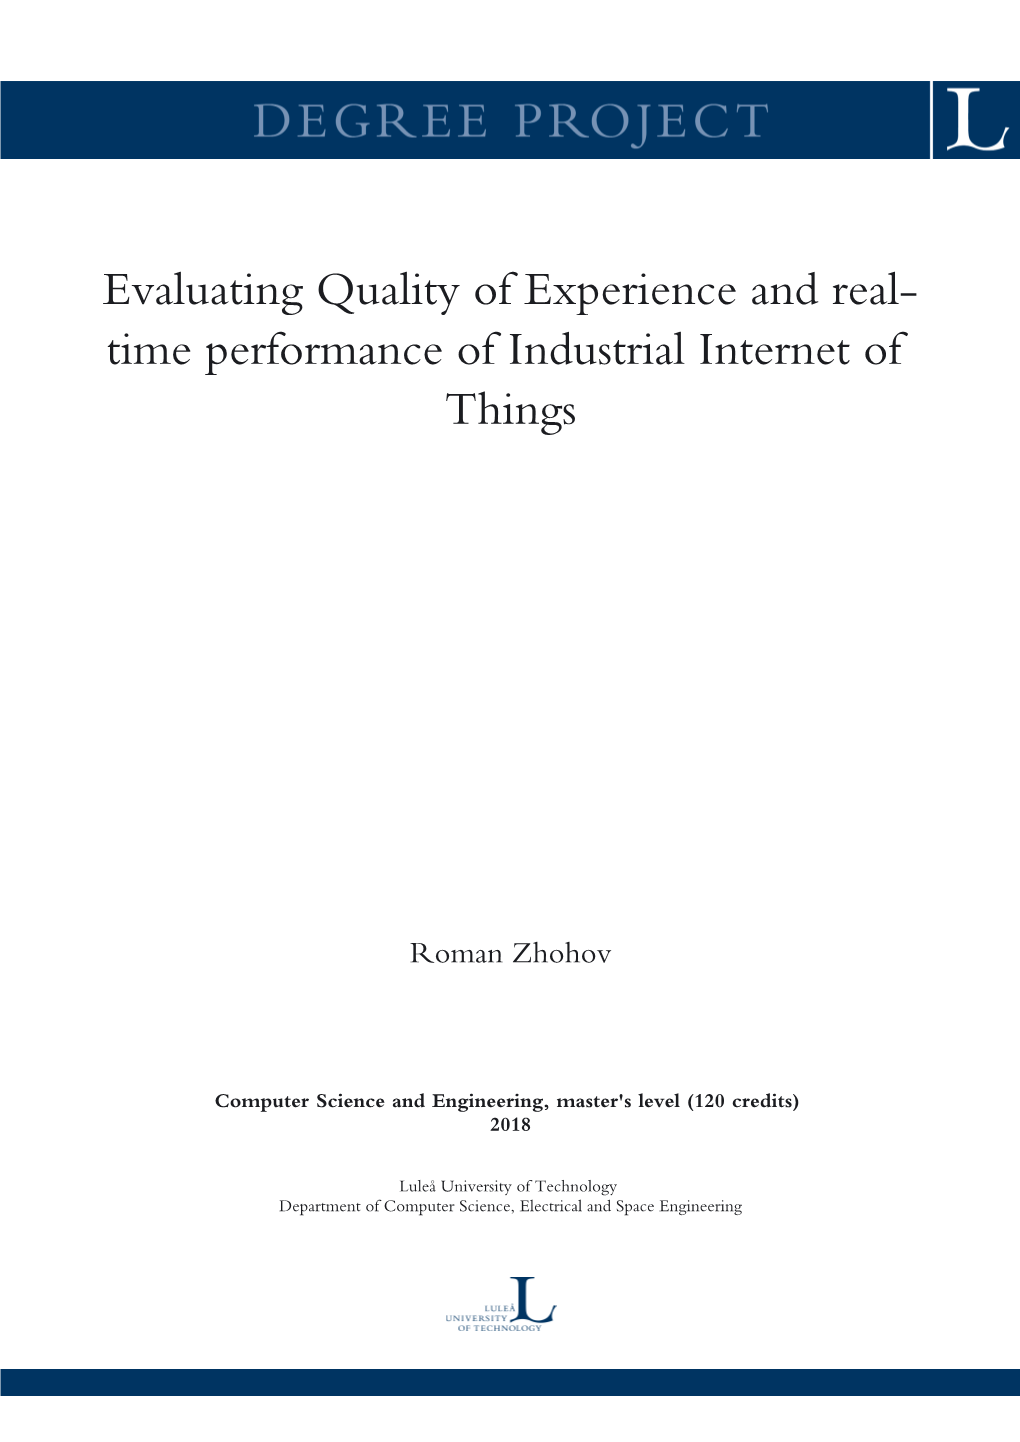 Evaluating Quality of Experience and Real- Time Performance of Industrial Internet of Things